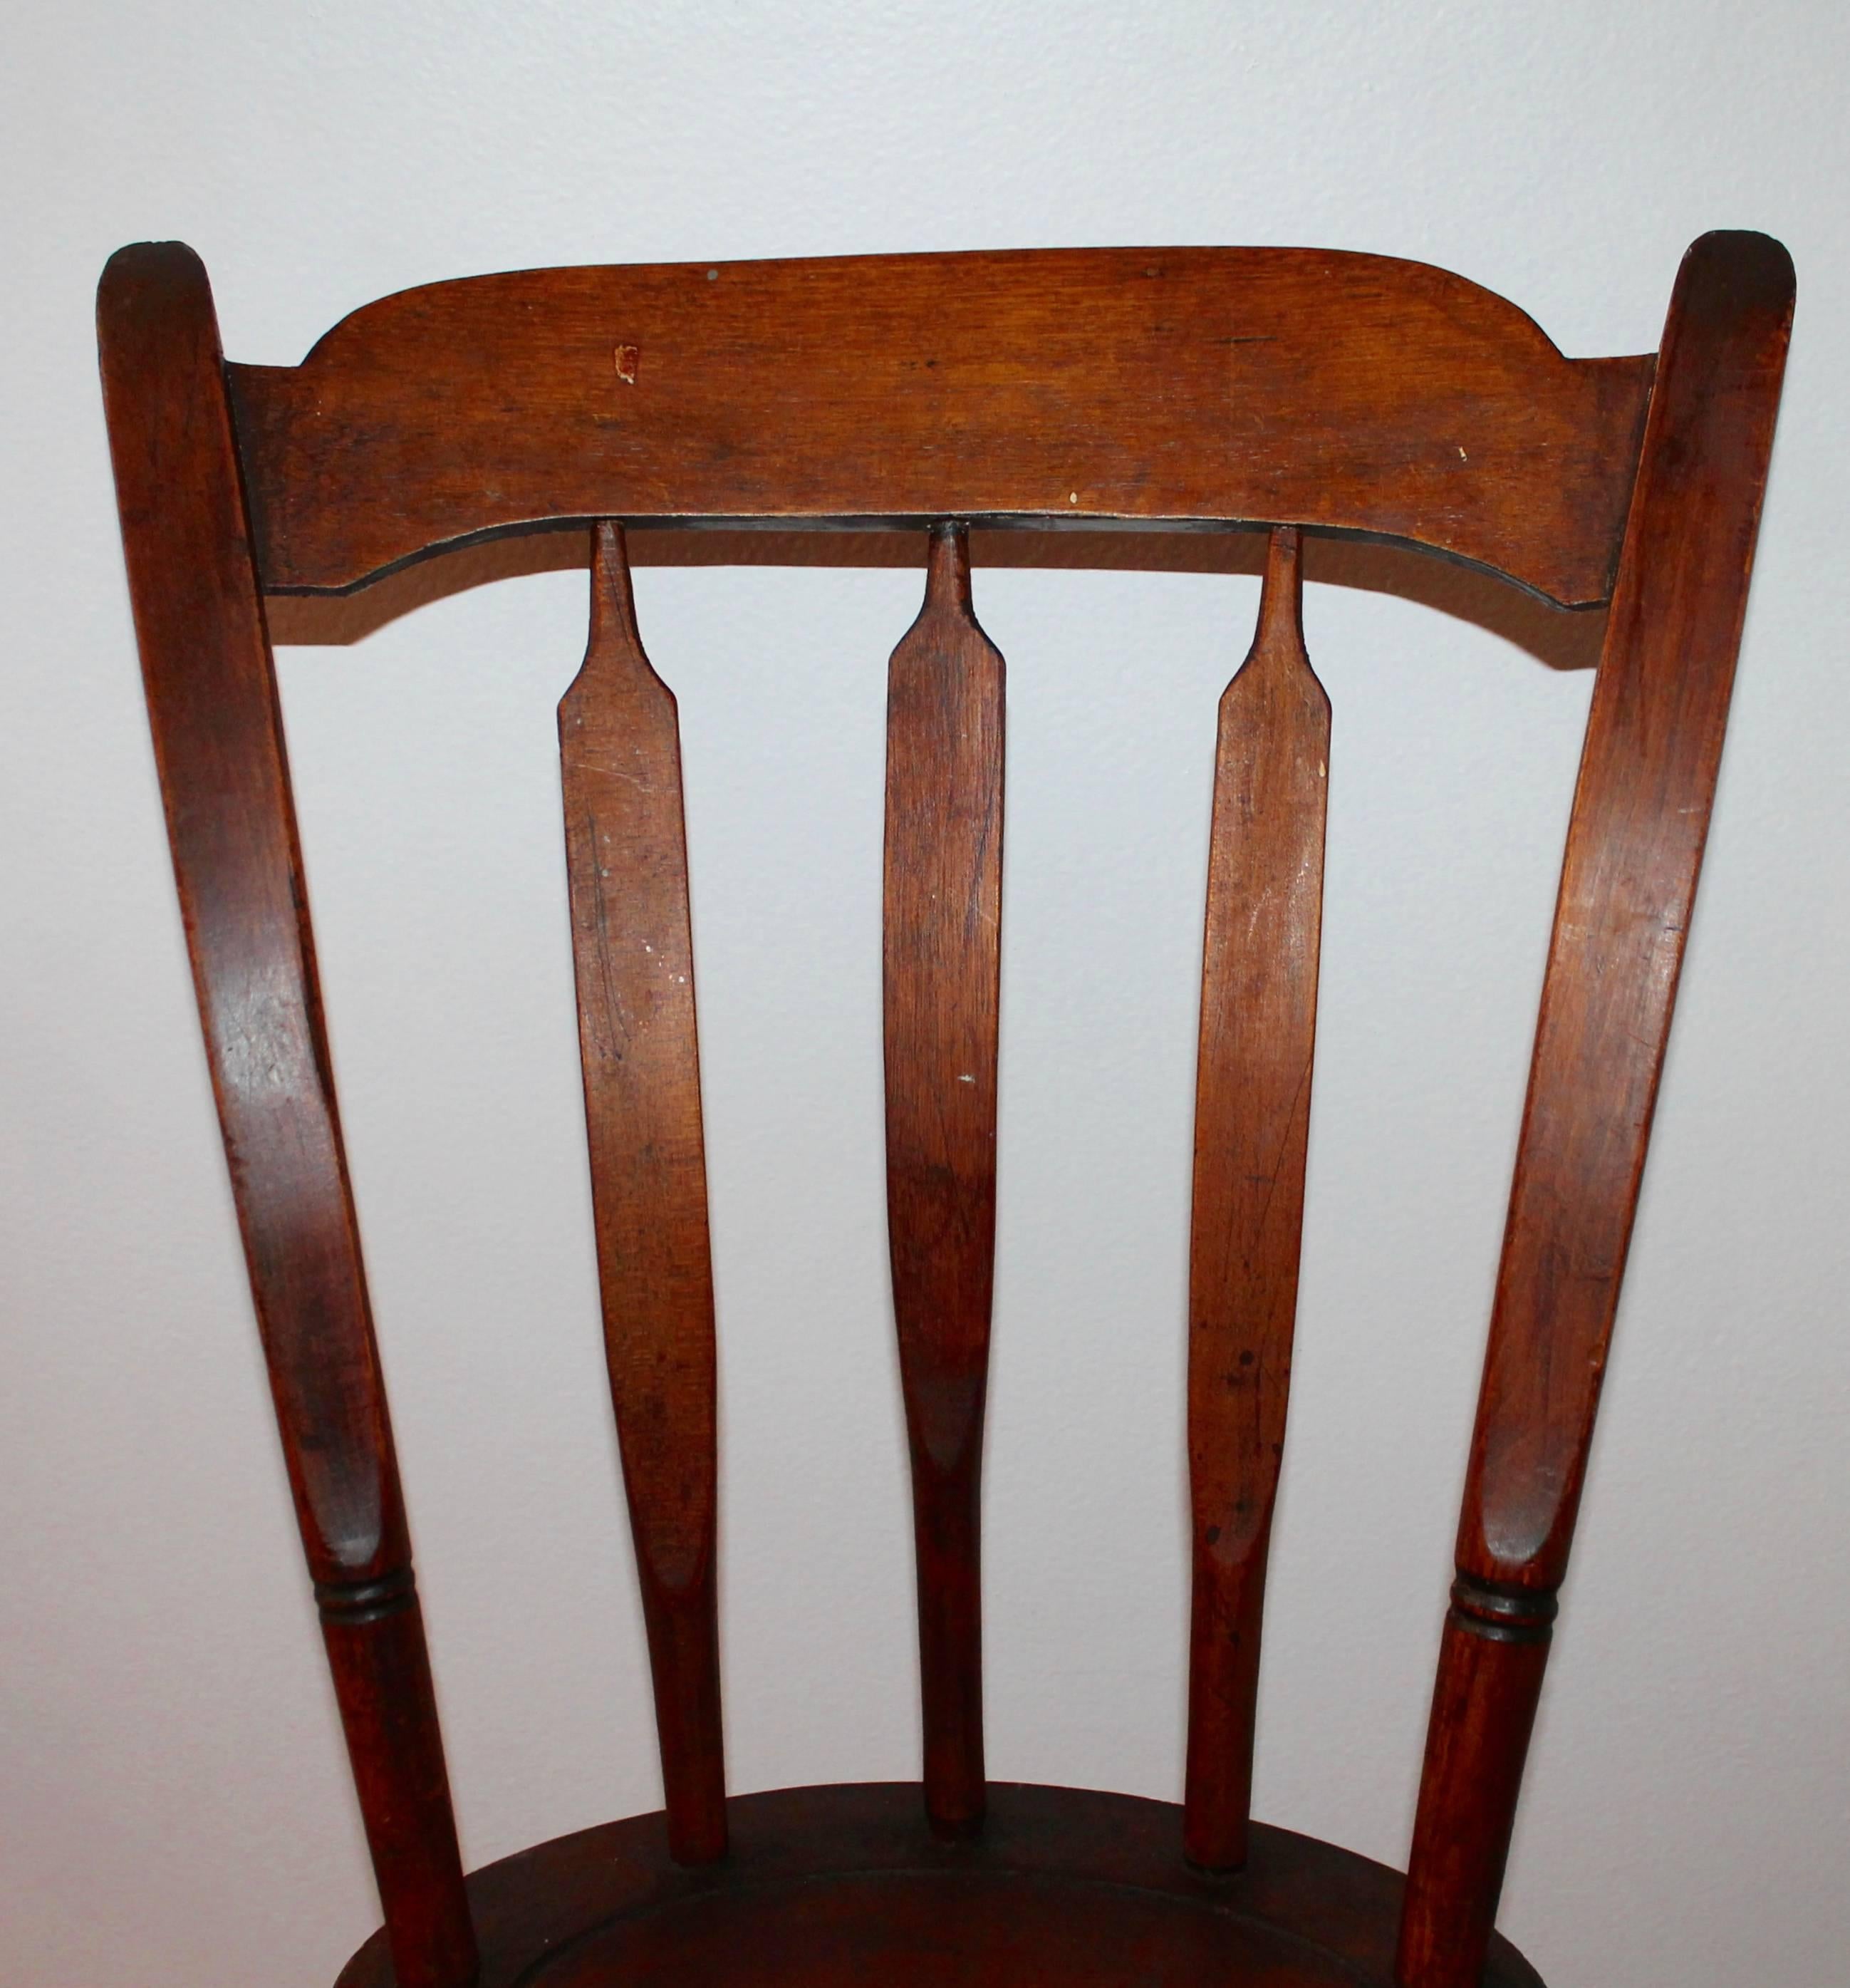 This is one of the best examples of an early 19th century great form arrow back child's windsor chair. The undisturbed surface is the very best. This chair is strong and sturdy condition.